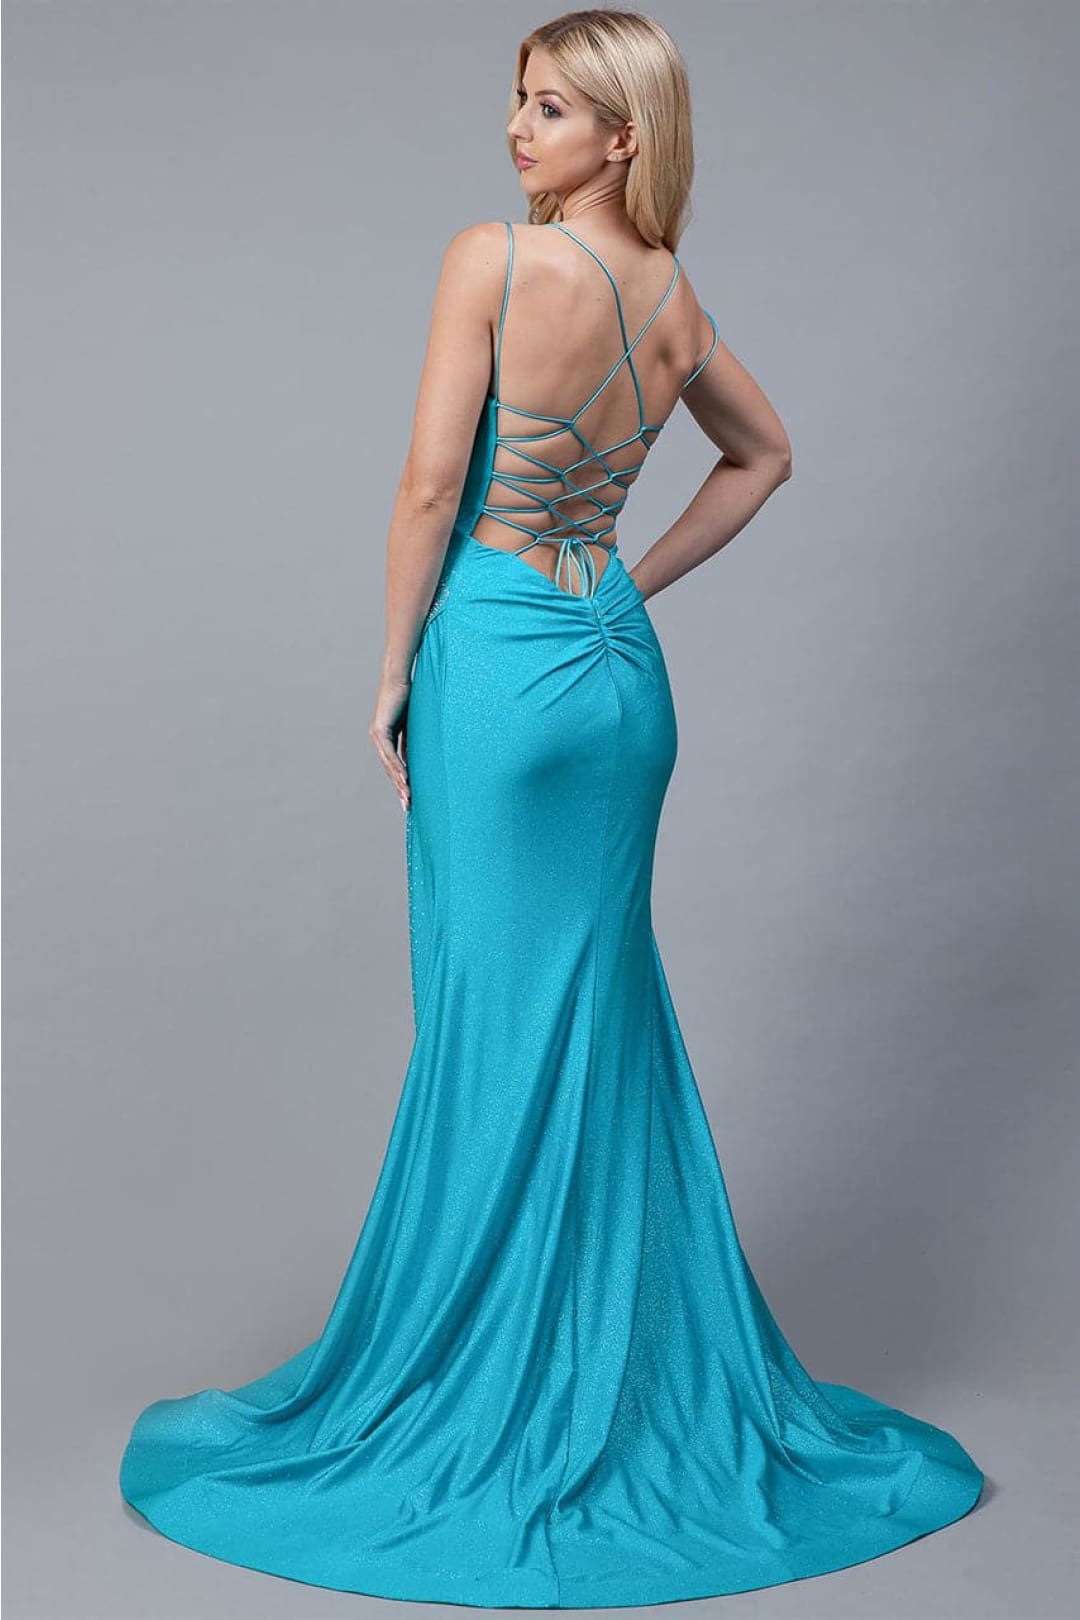 Amelia Couture 399 Strappy Backless Glitter Stretchy Prom Evening Gown - Dress